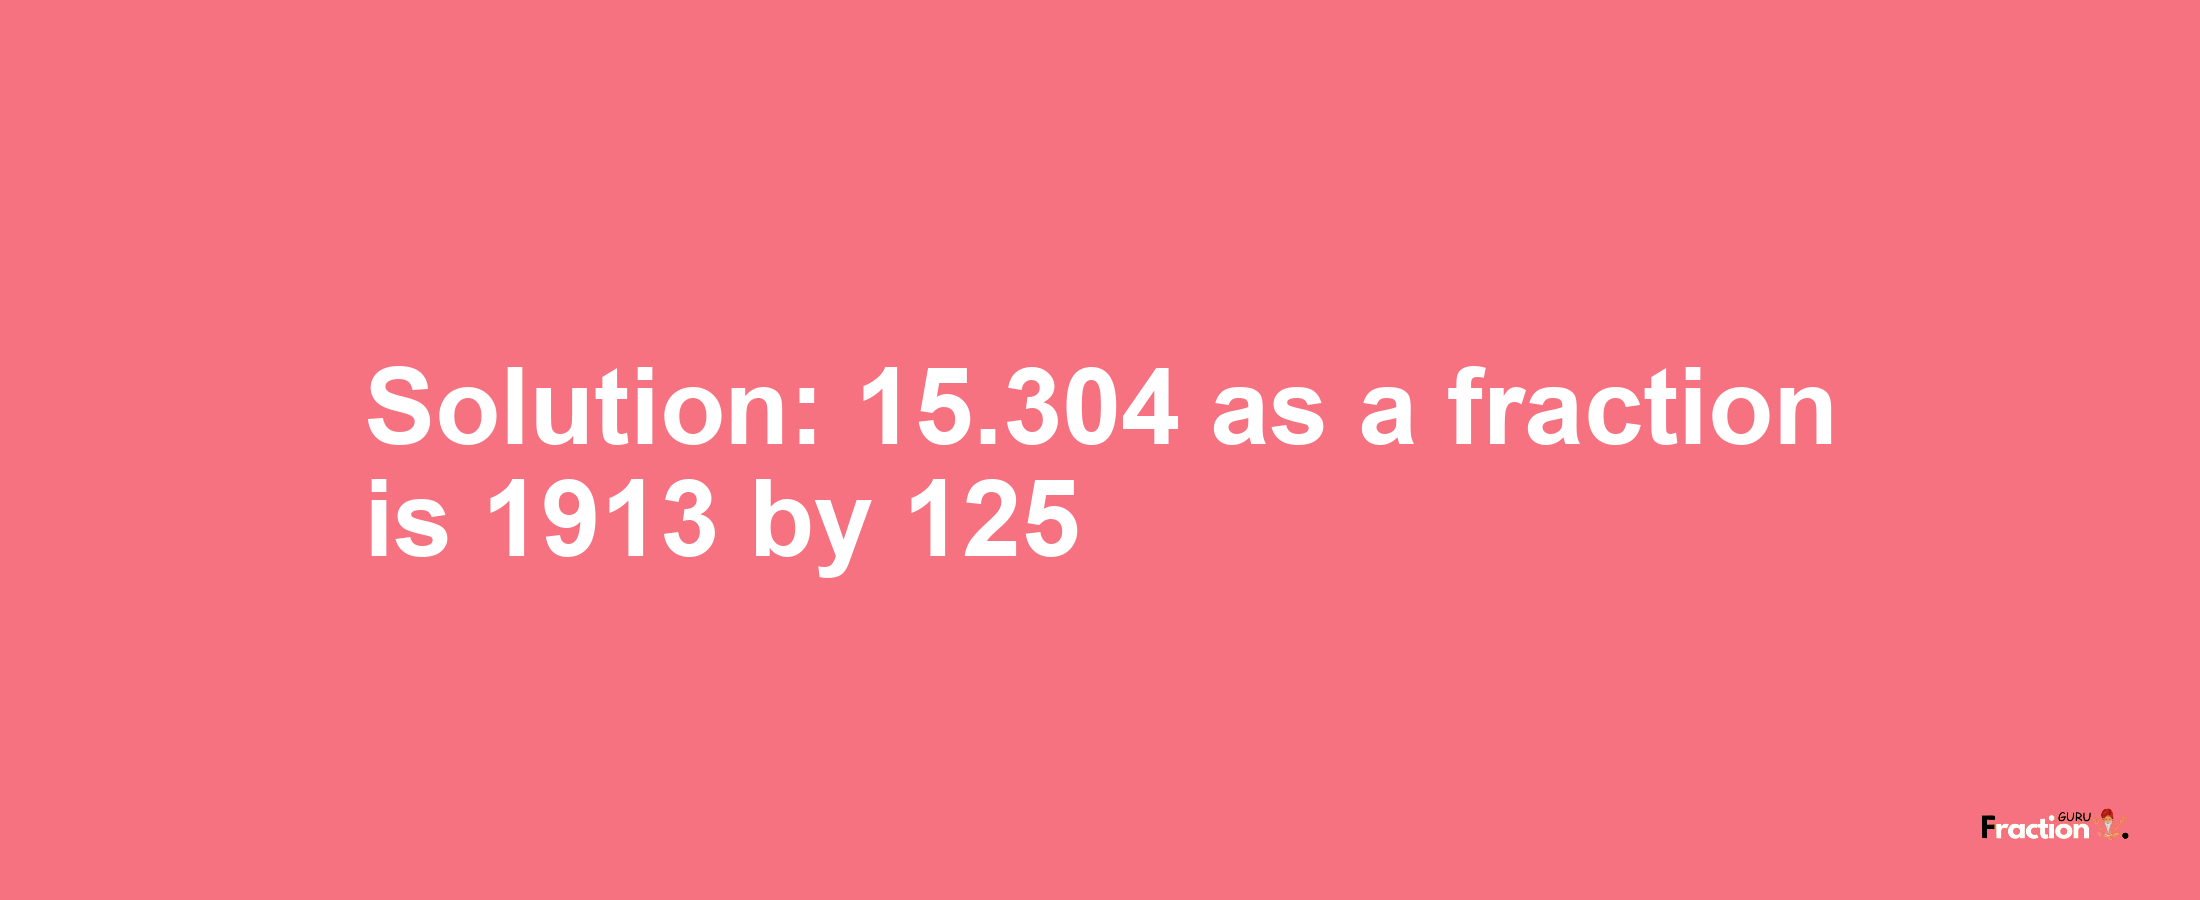 Solution:15.304 as a fraction is 1913/125